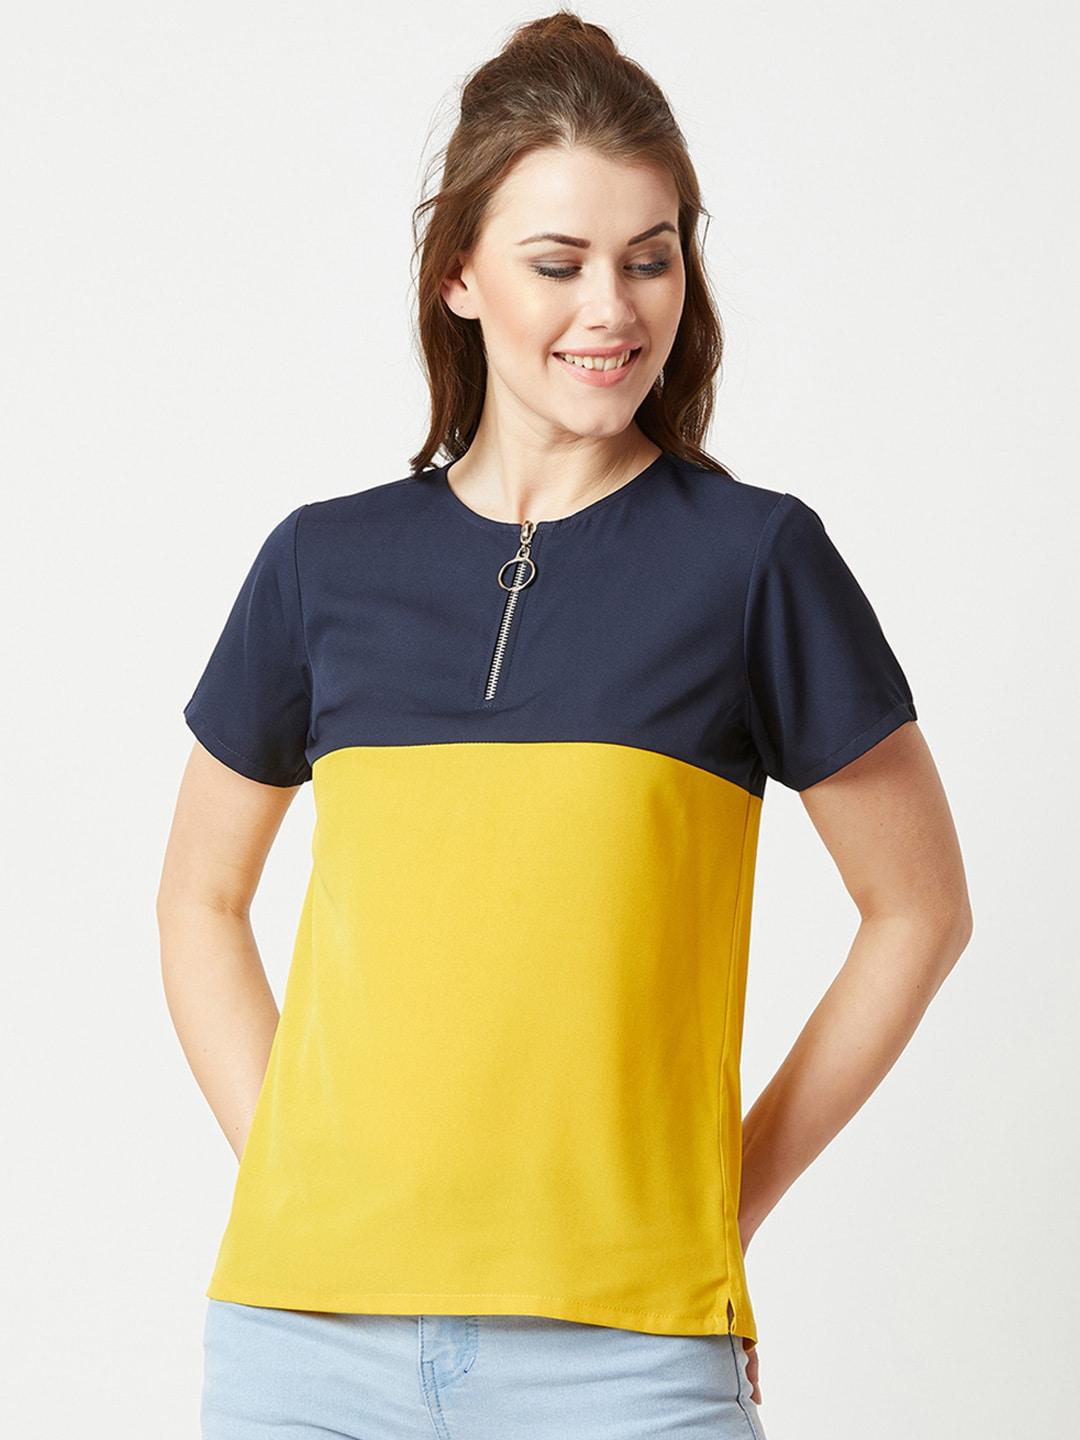 miss chase women navy blue & yellow colourblocked top